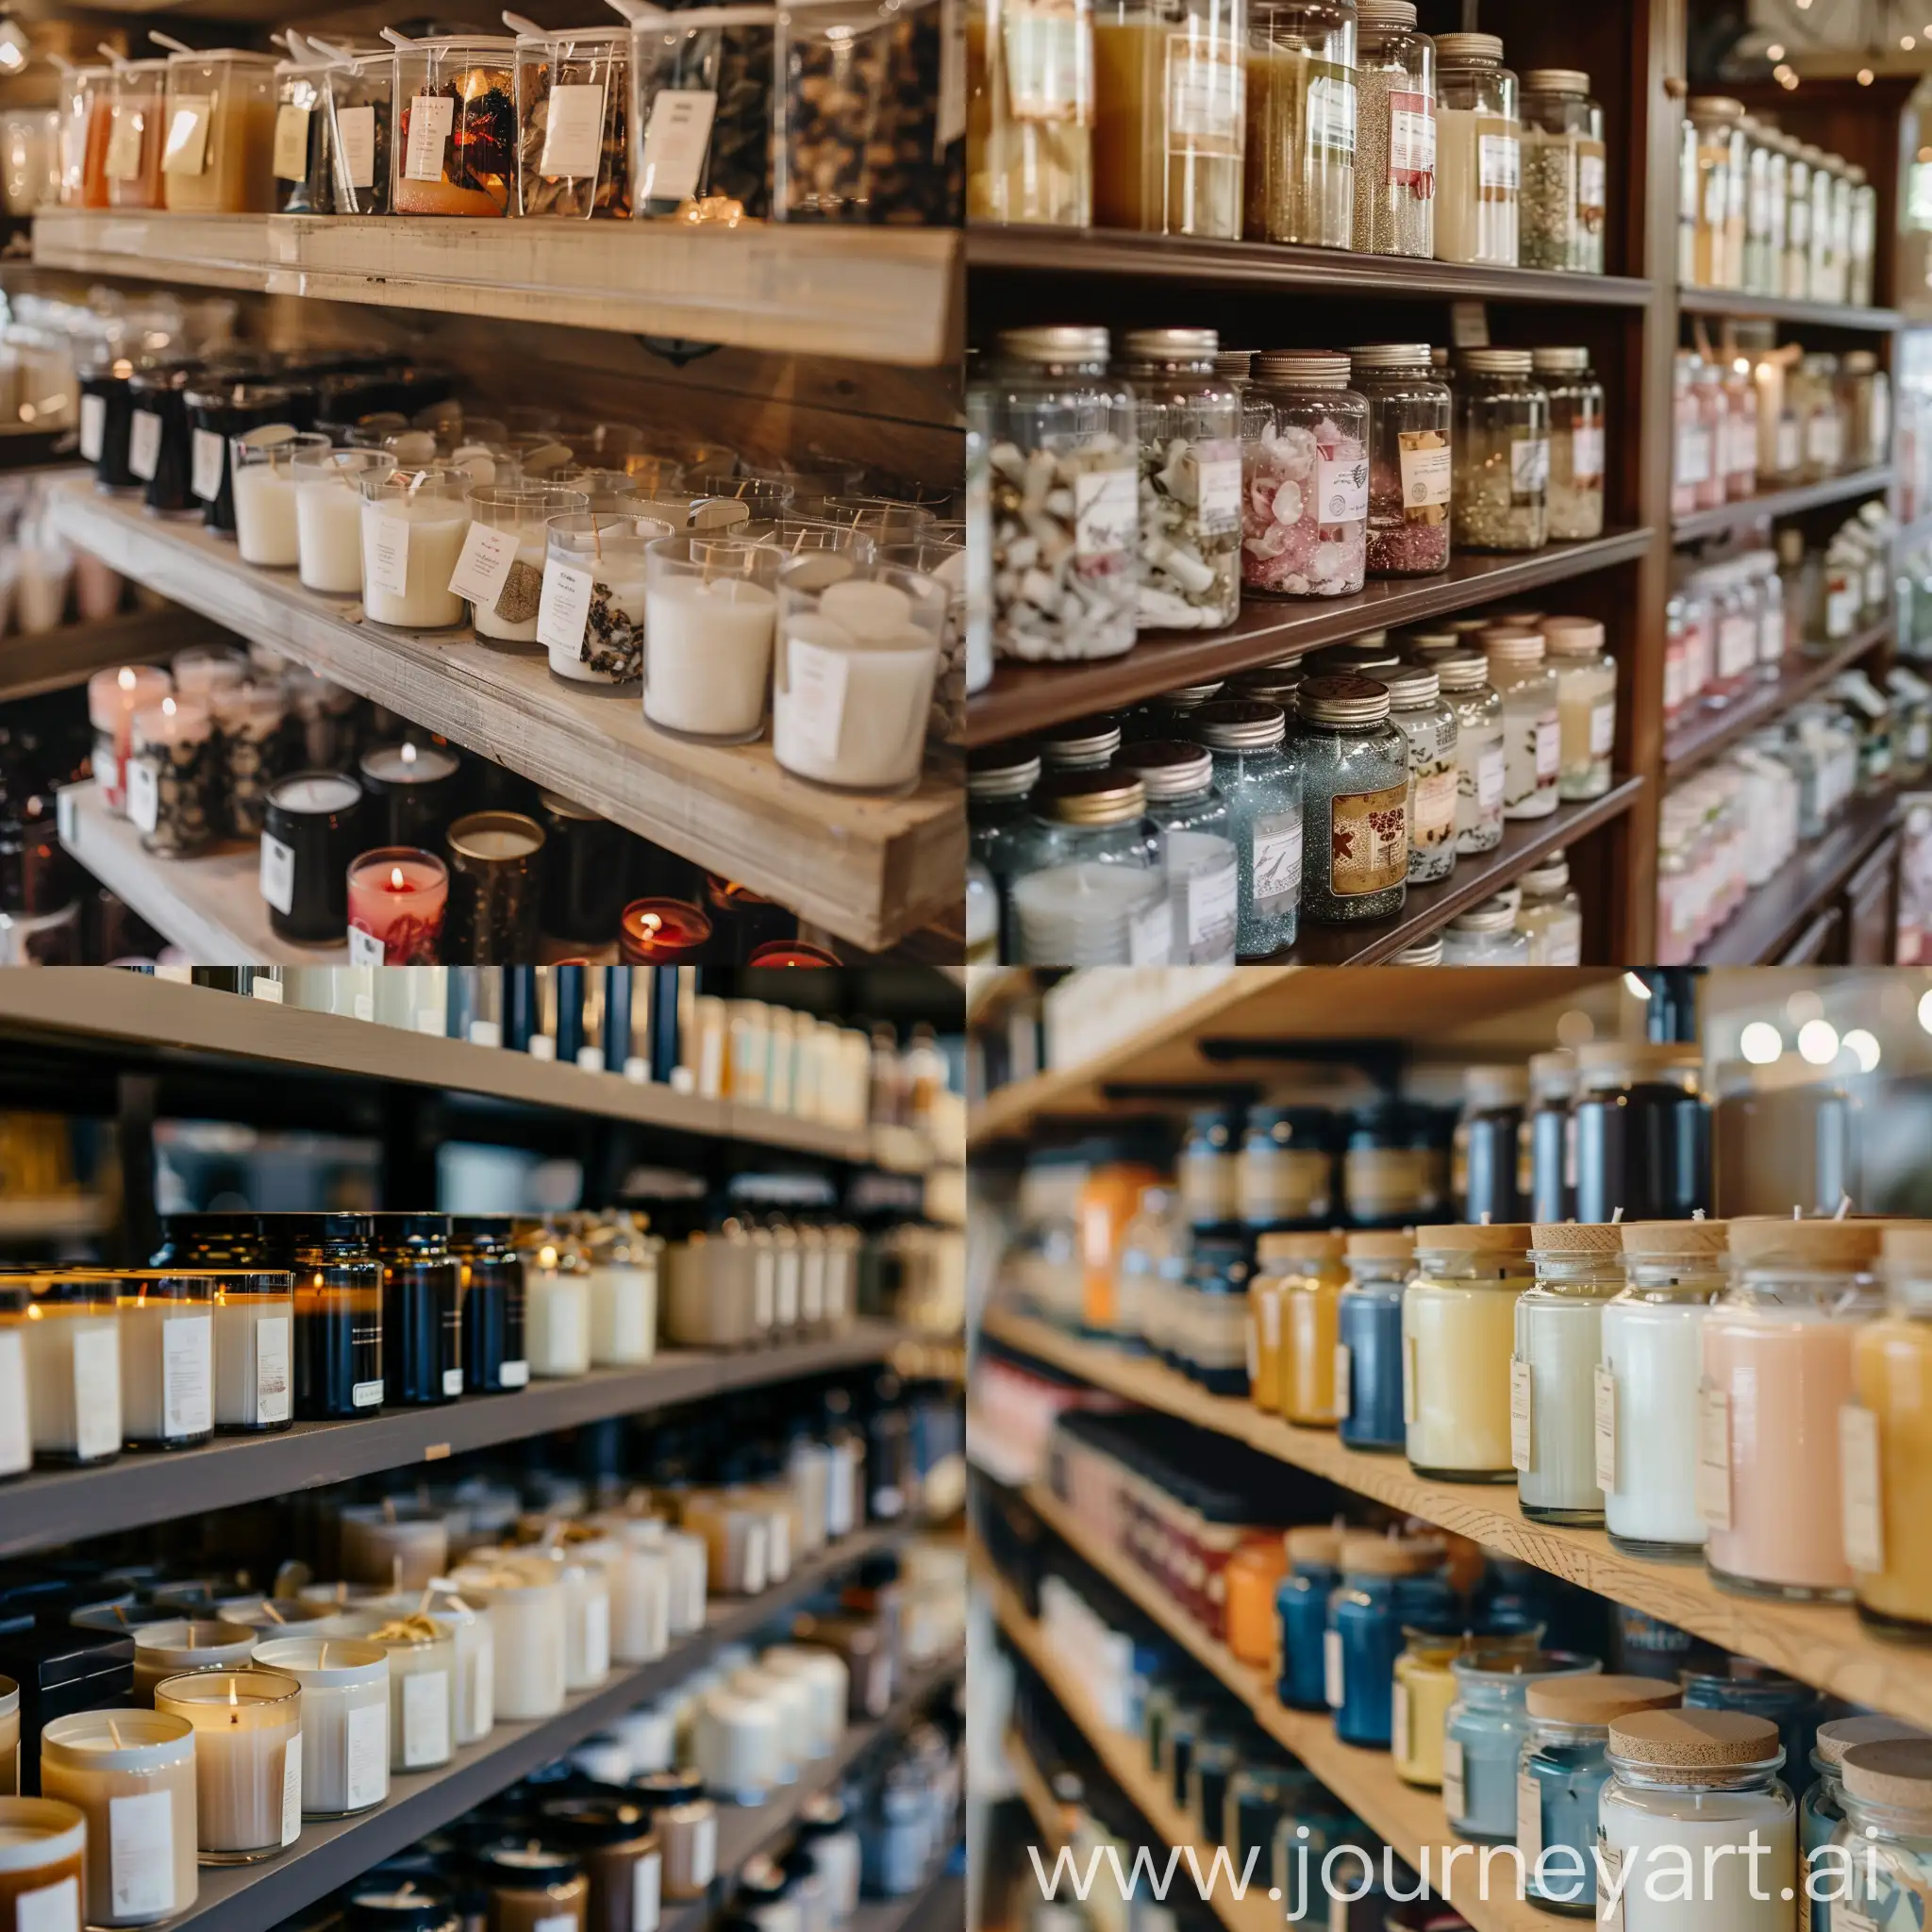 Assortment-of-Unlit-Candles-Displayed-on-Shelf-in-Candle-Store